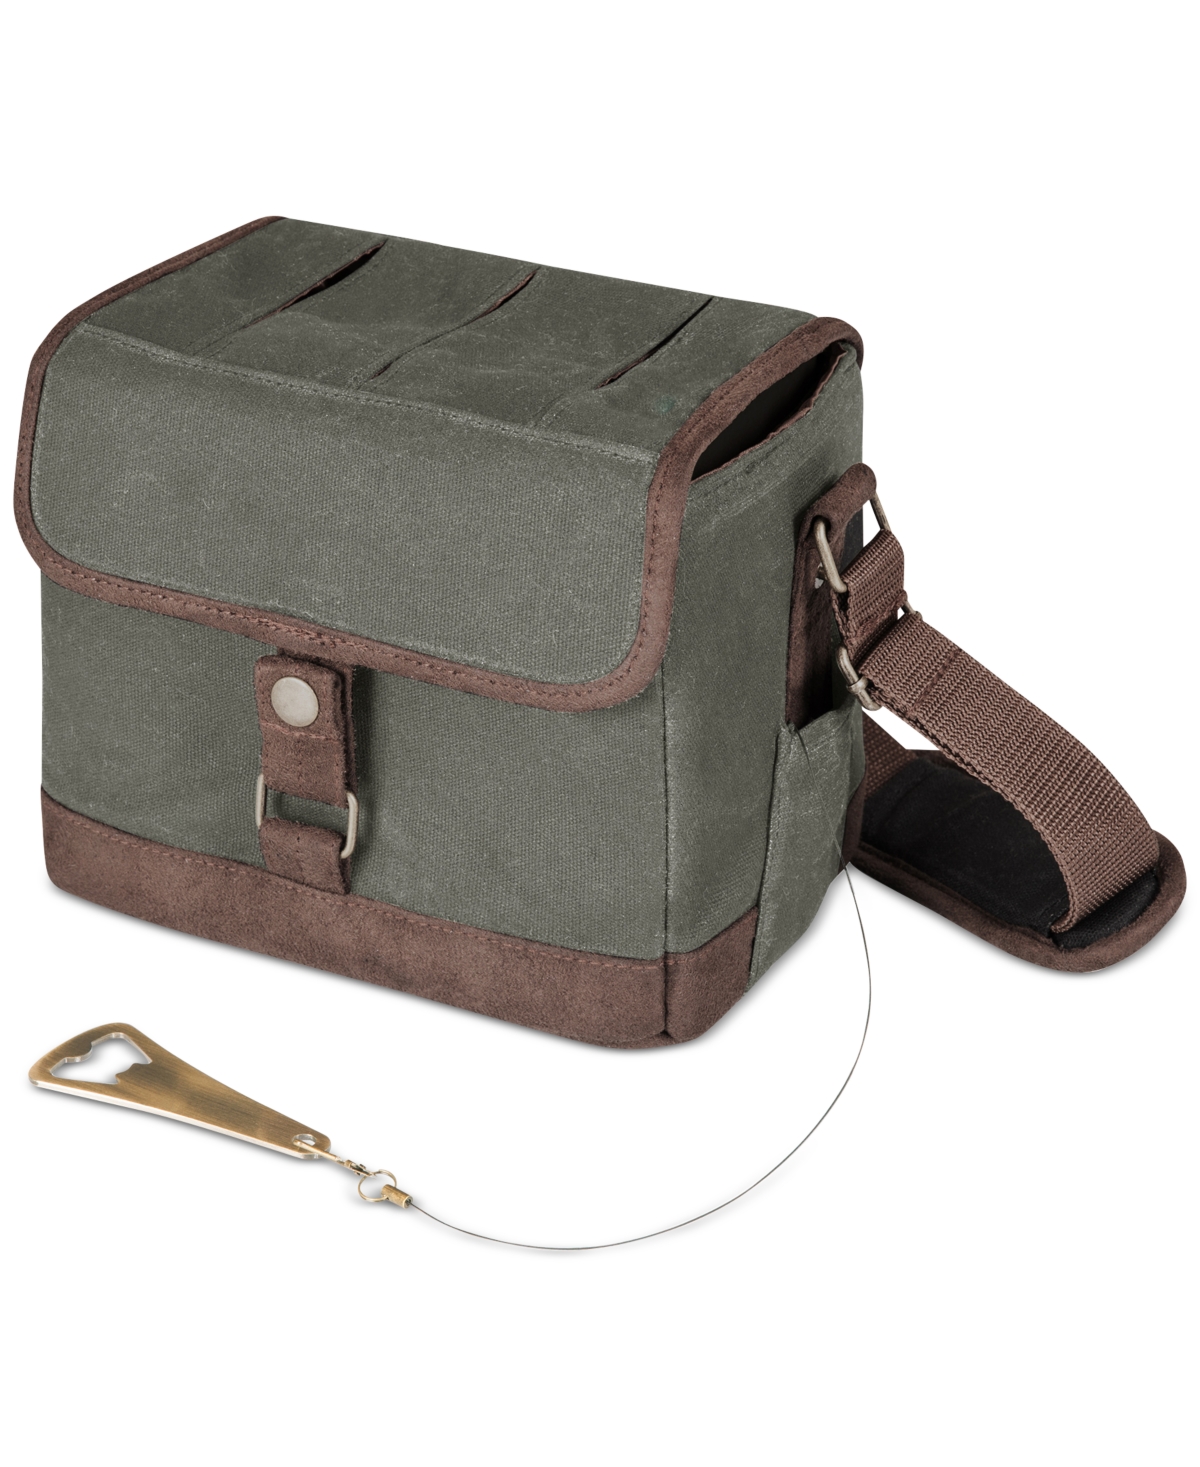 Legacy by Picnic Time Khaki Green & Brown Beer Caddy Cooler Tote with Opener - Khaki